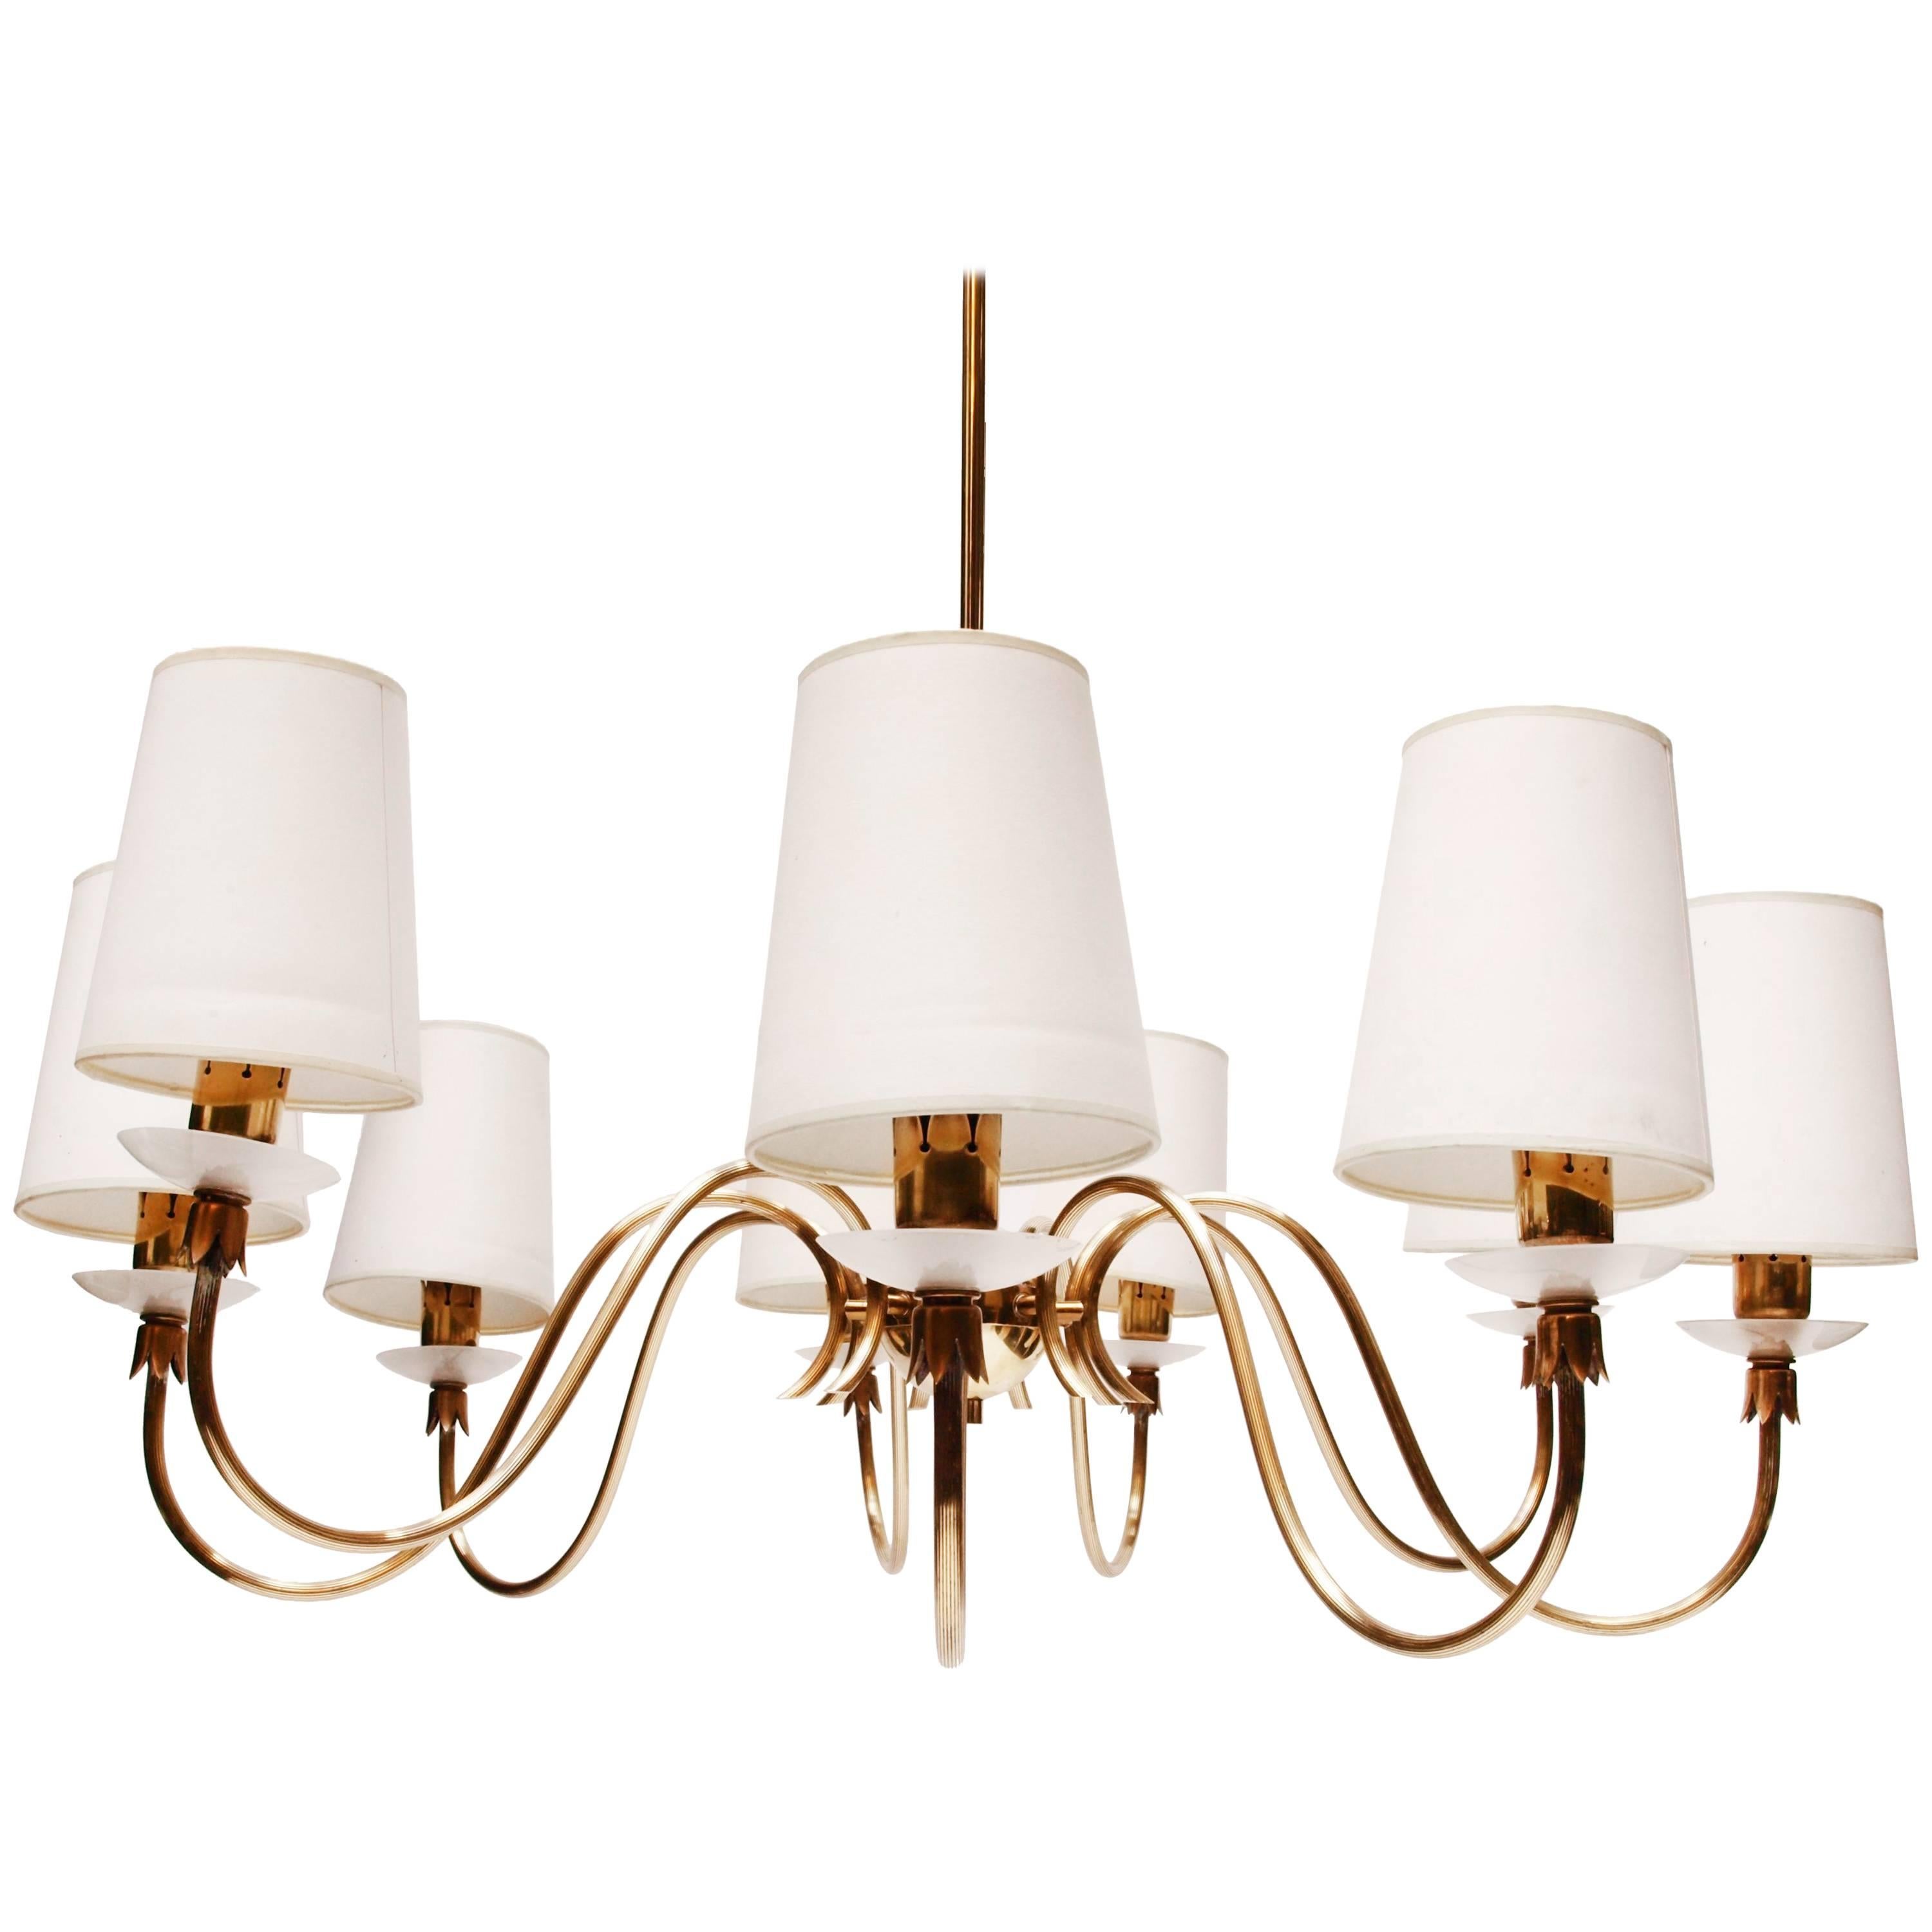 Elegant scrolled 9 arm chandelier by Angelo Lelli for Arredoluce model no. 12834. Classical but transitional in design, with distinctive candle lightbulb holders. It is held from the ceiling by a brass rod of modern circular design. The arms feature